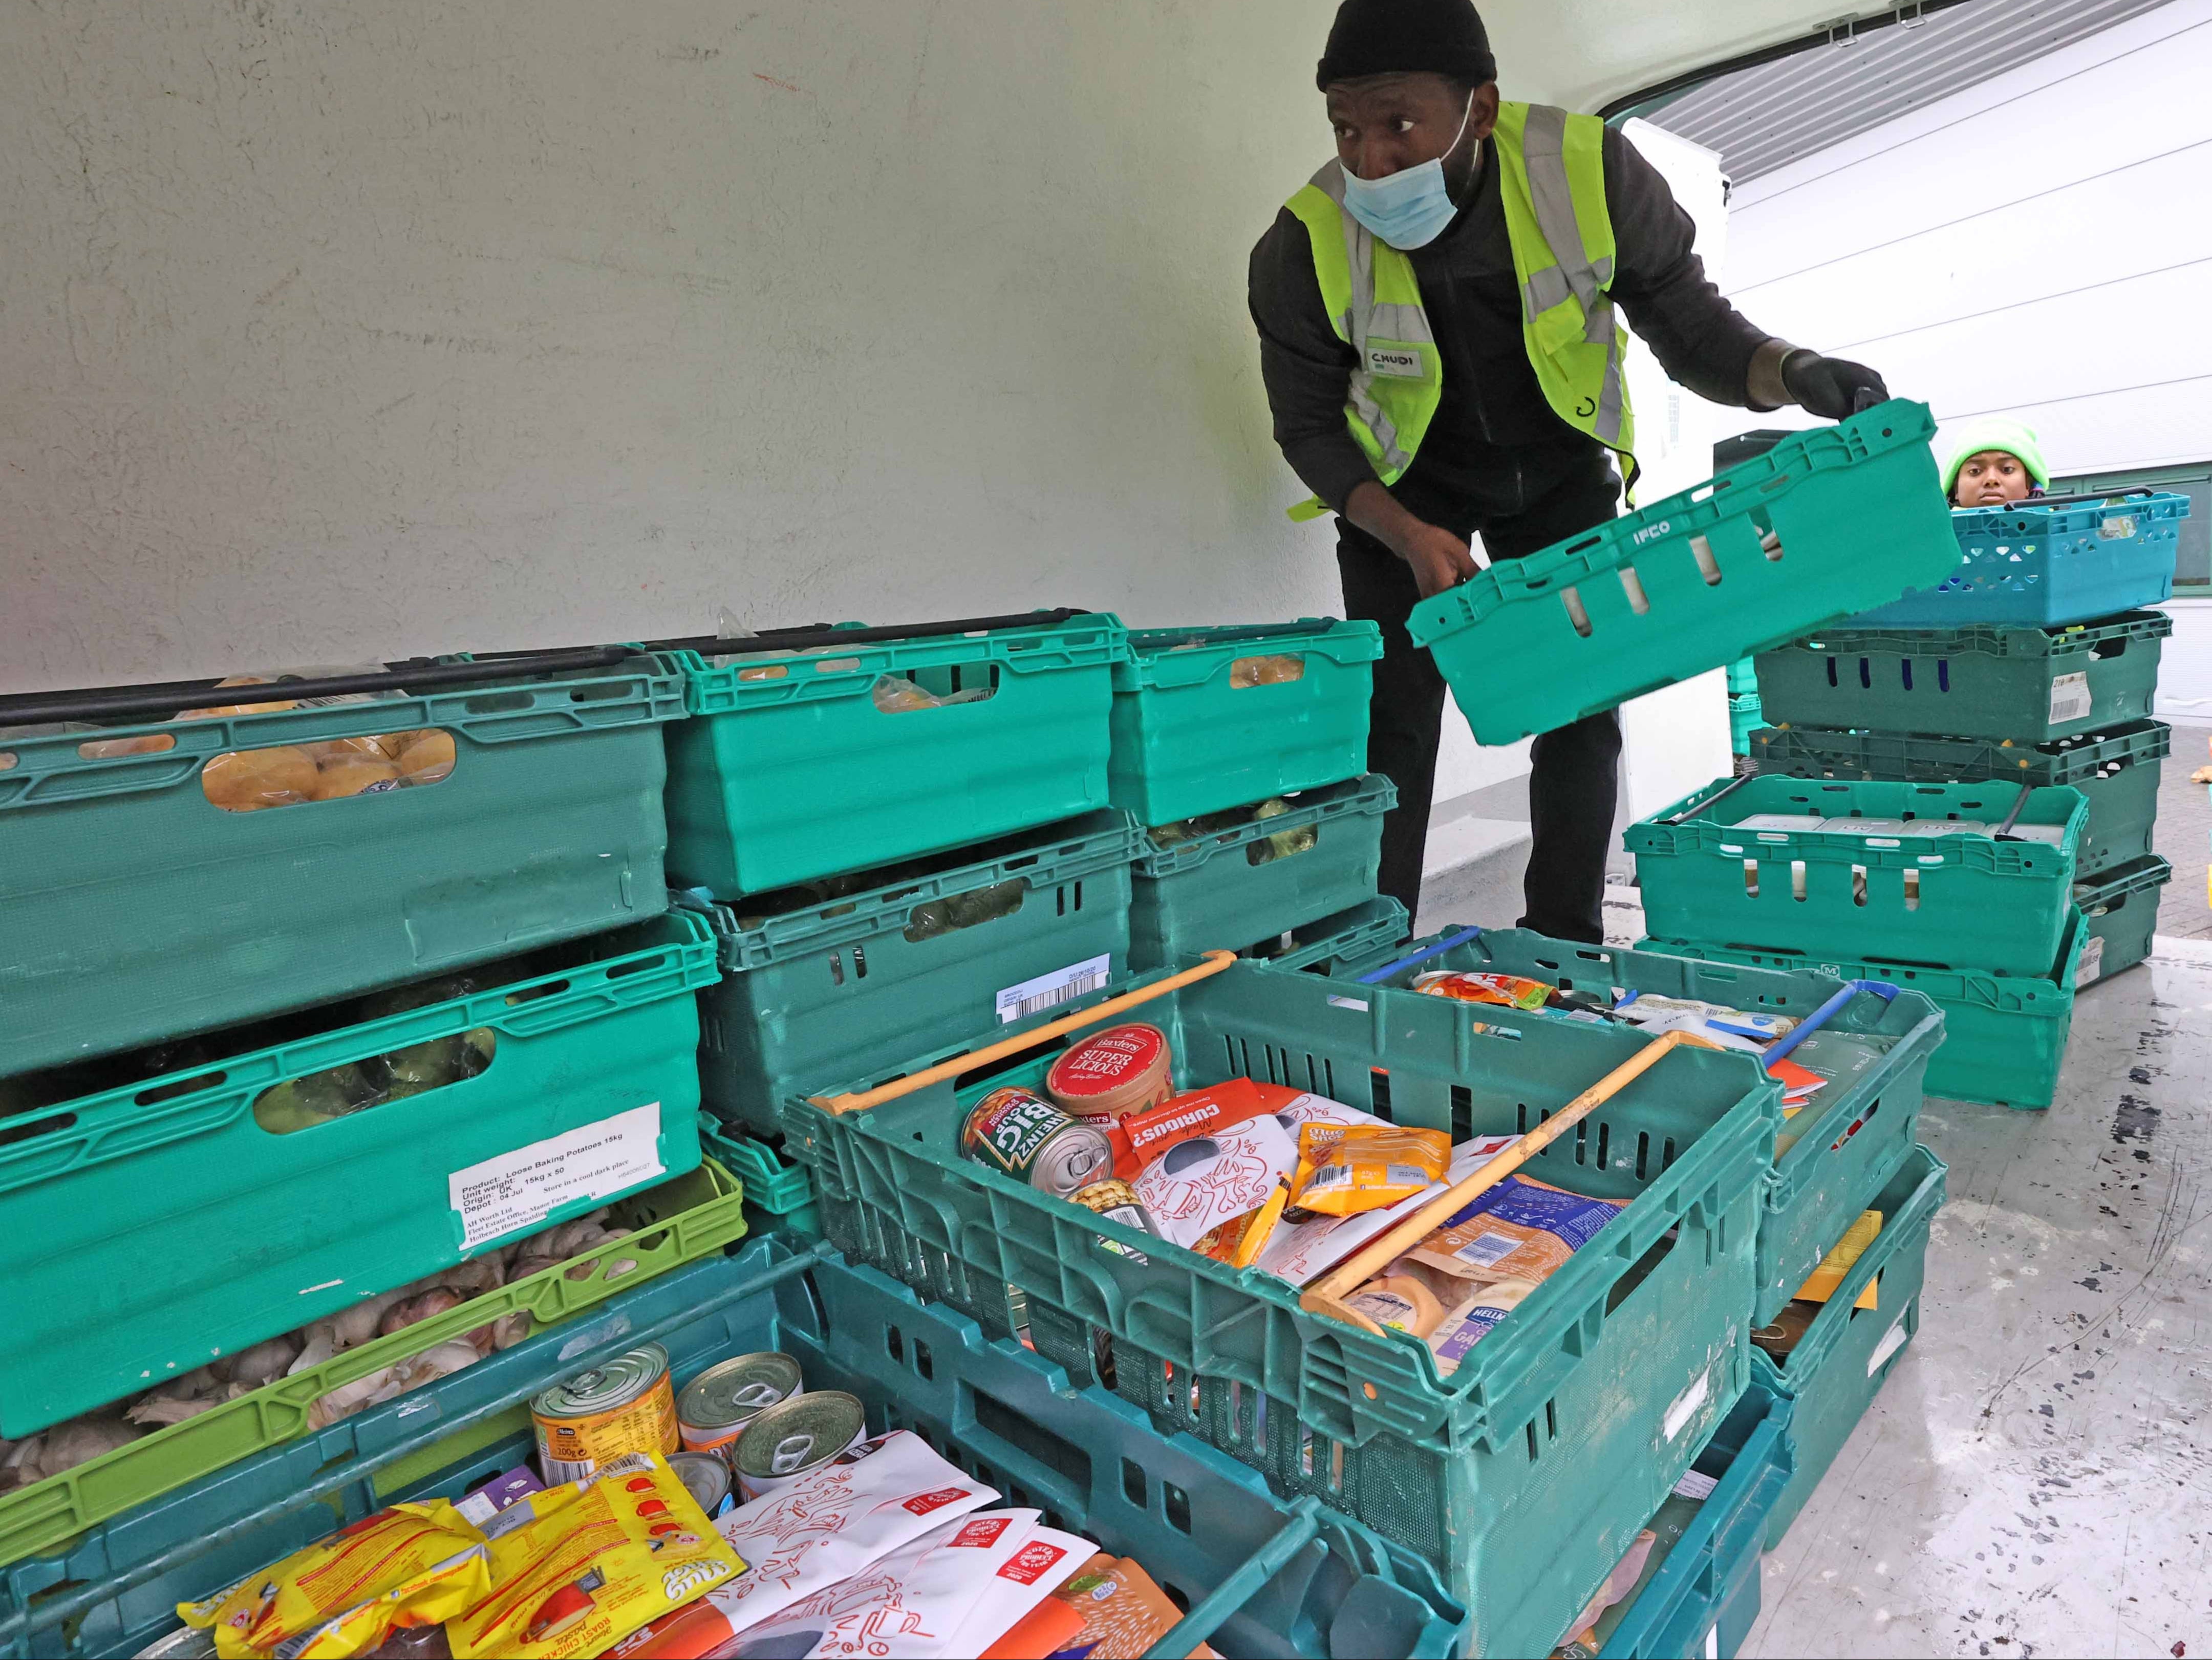 Mr Read praised The Independent’s Help the Hungry campaign, adding: 'It is really important that there is action to address issues around food poverty and food insecurity in households’